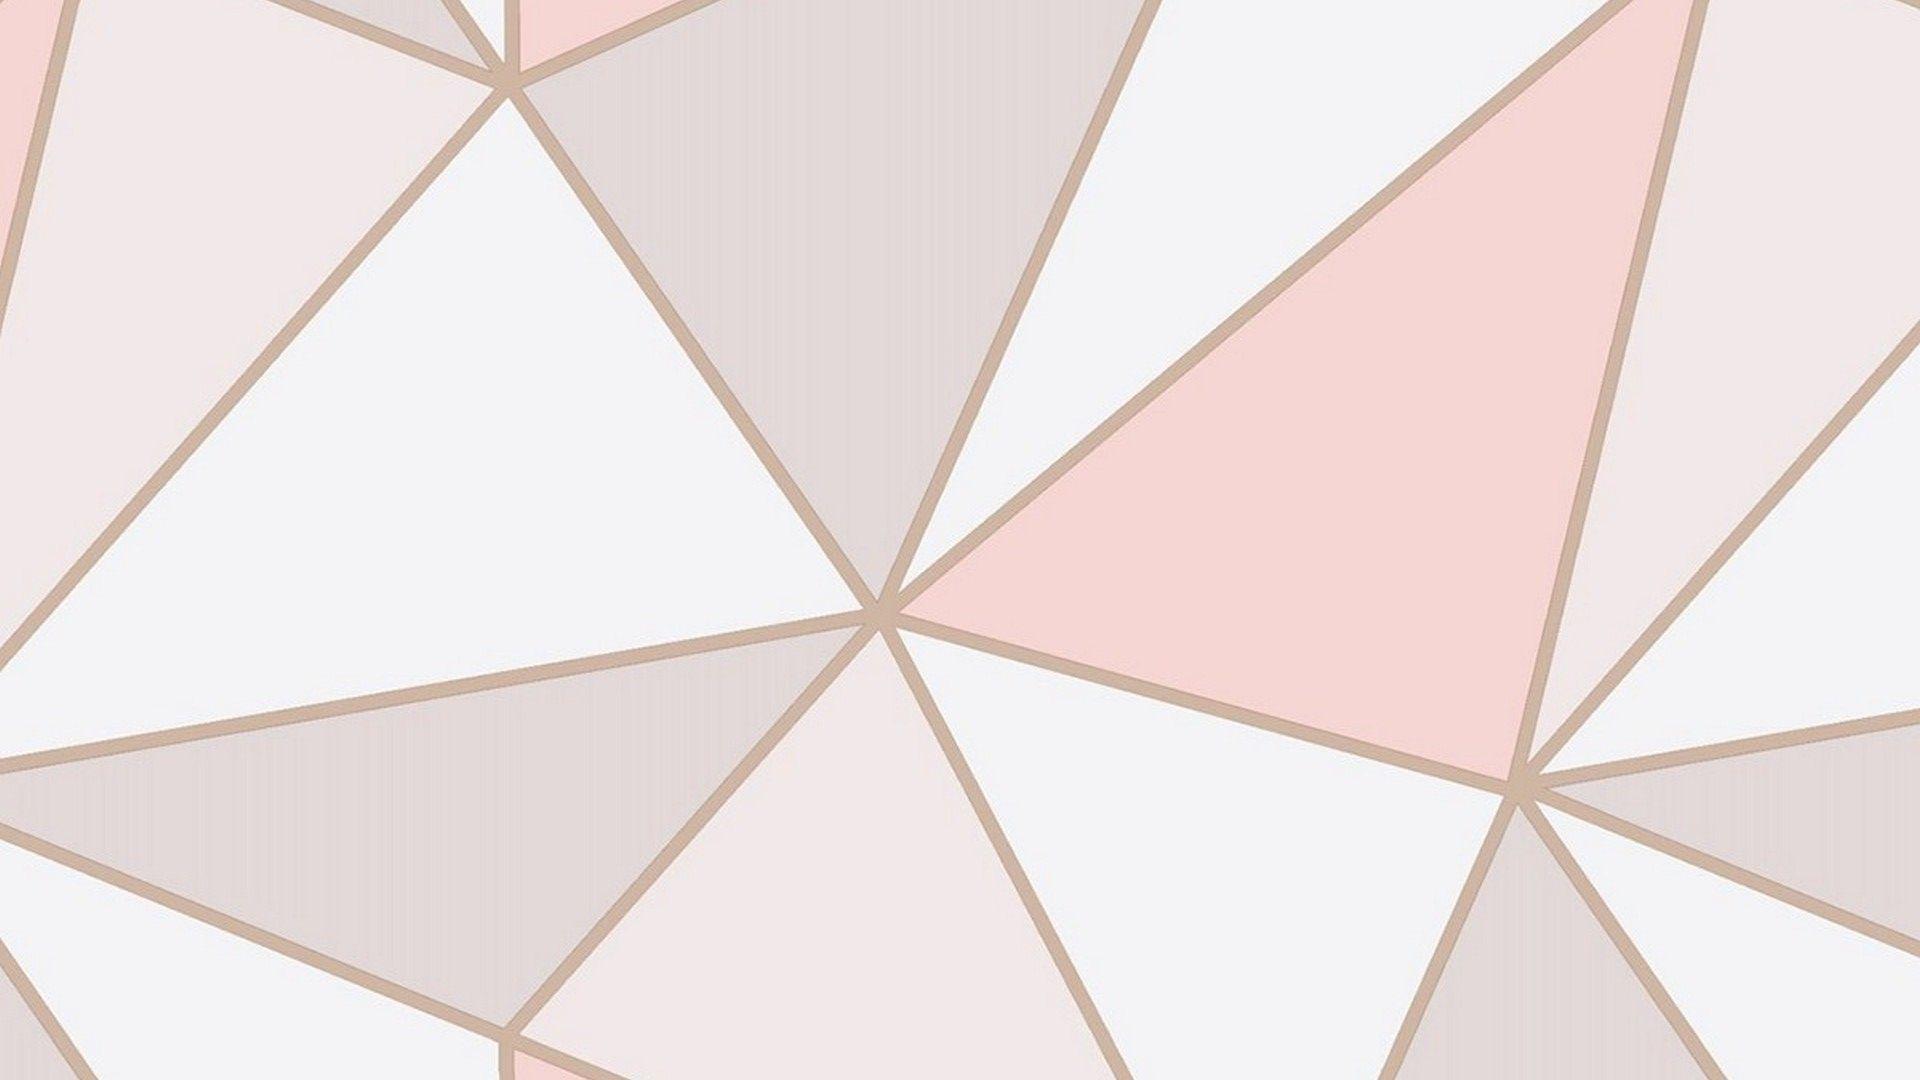 Pink Rose Gold Wallpaper Mobile Background APK for Android Download